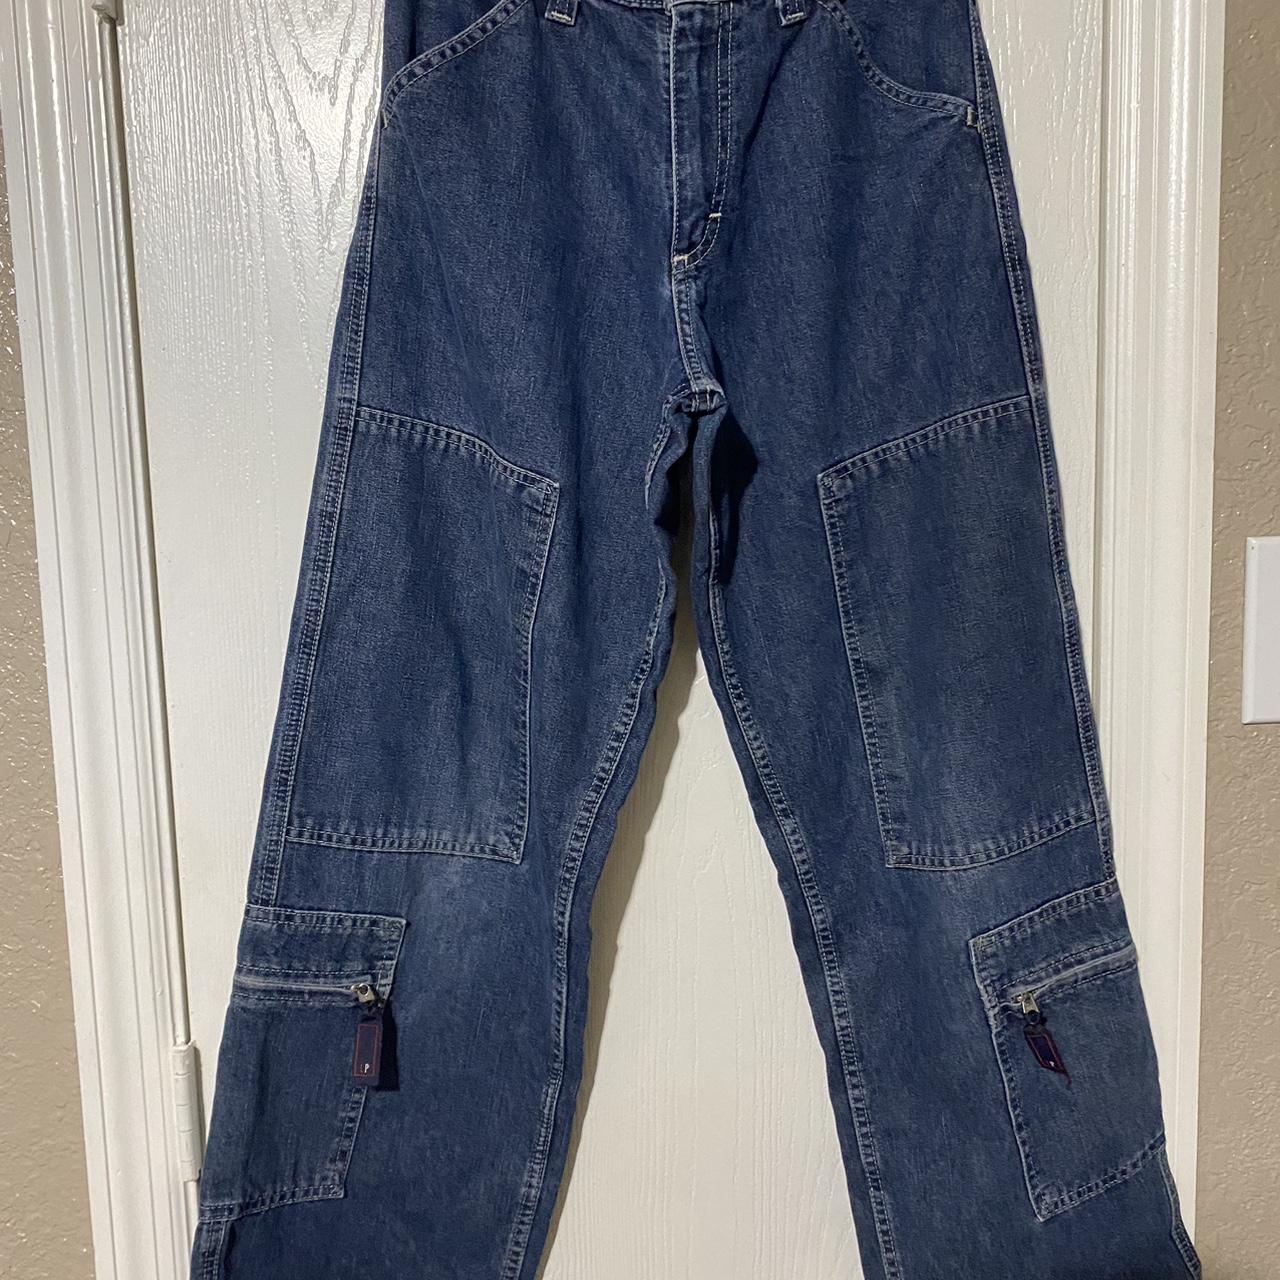 VTG 90s Lee Pipes Cargo Jeans Boys Size XS Wide Leg 22X21 Junco Style | eBay